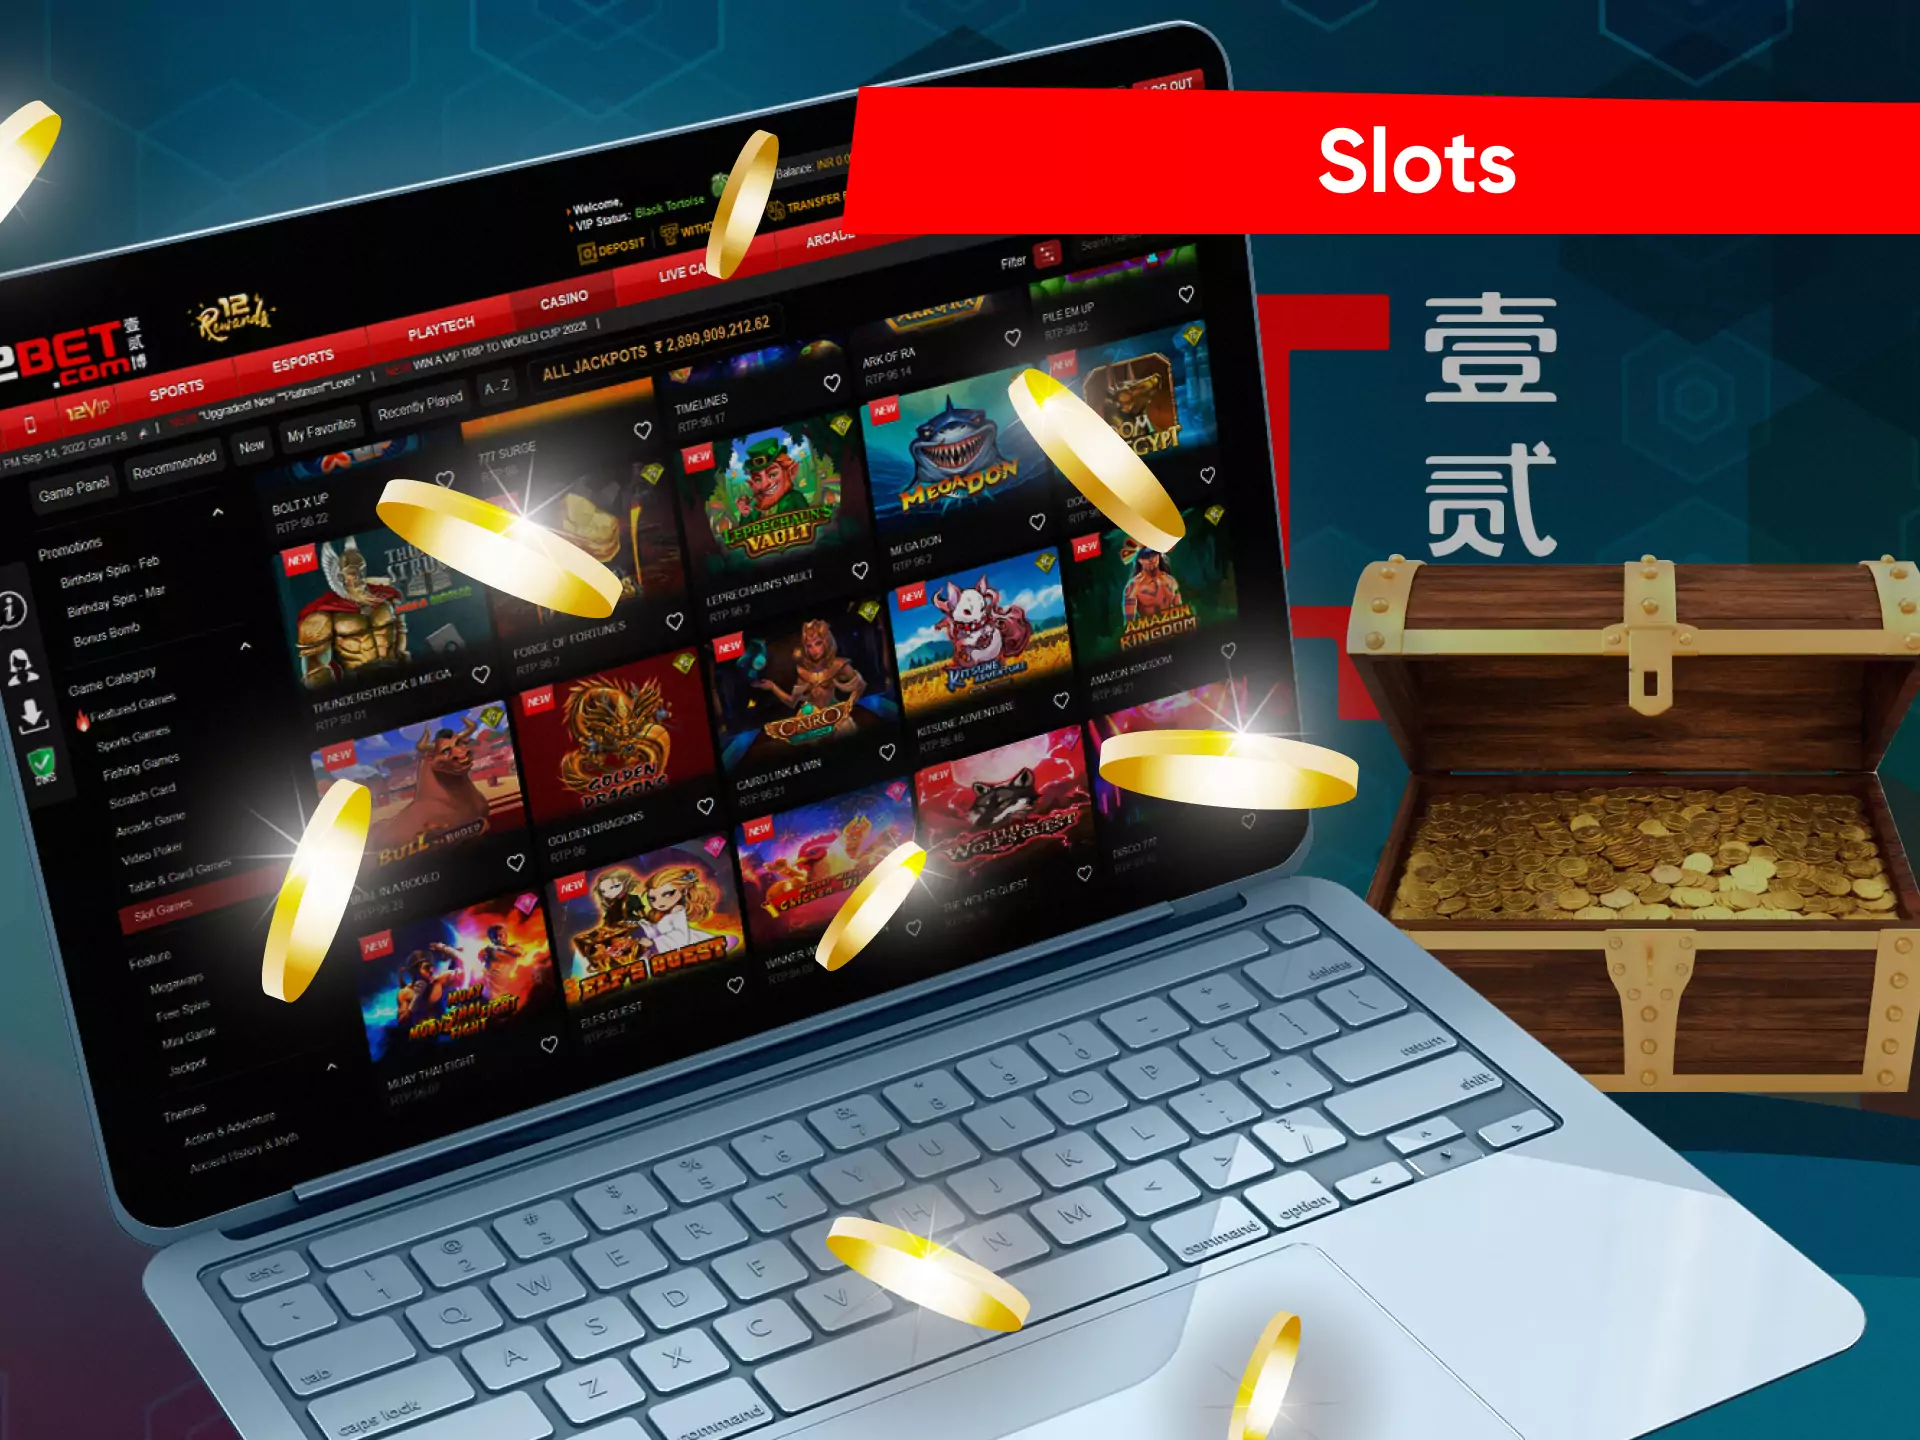 In the 12bet online casino, there are lots of amazing slot machines.